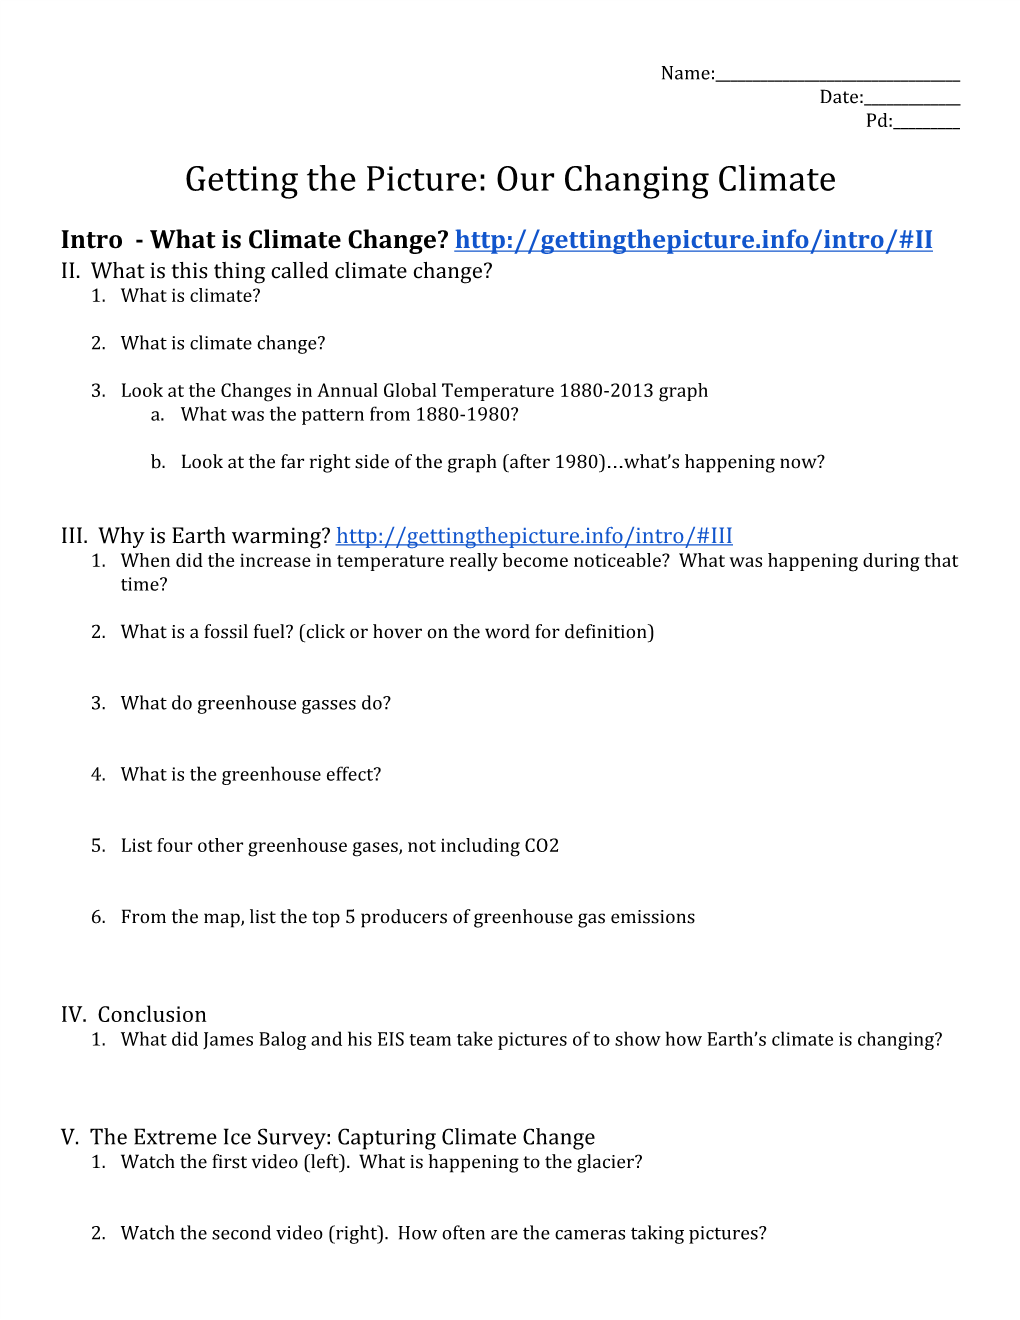 Getting the Picture: Our Changing Climate